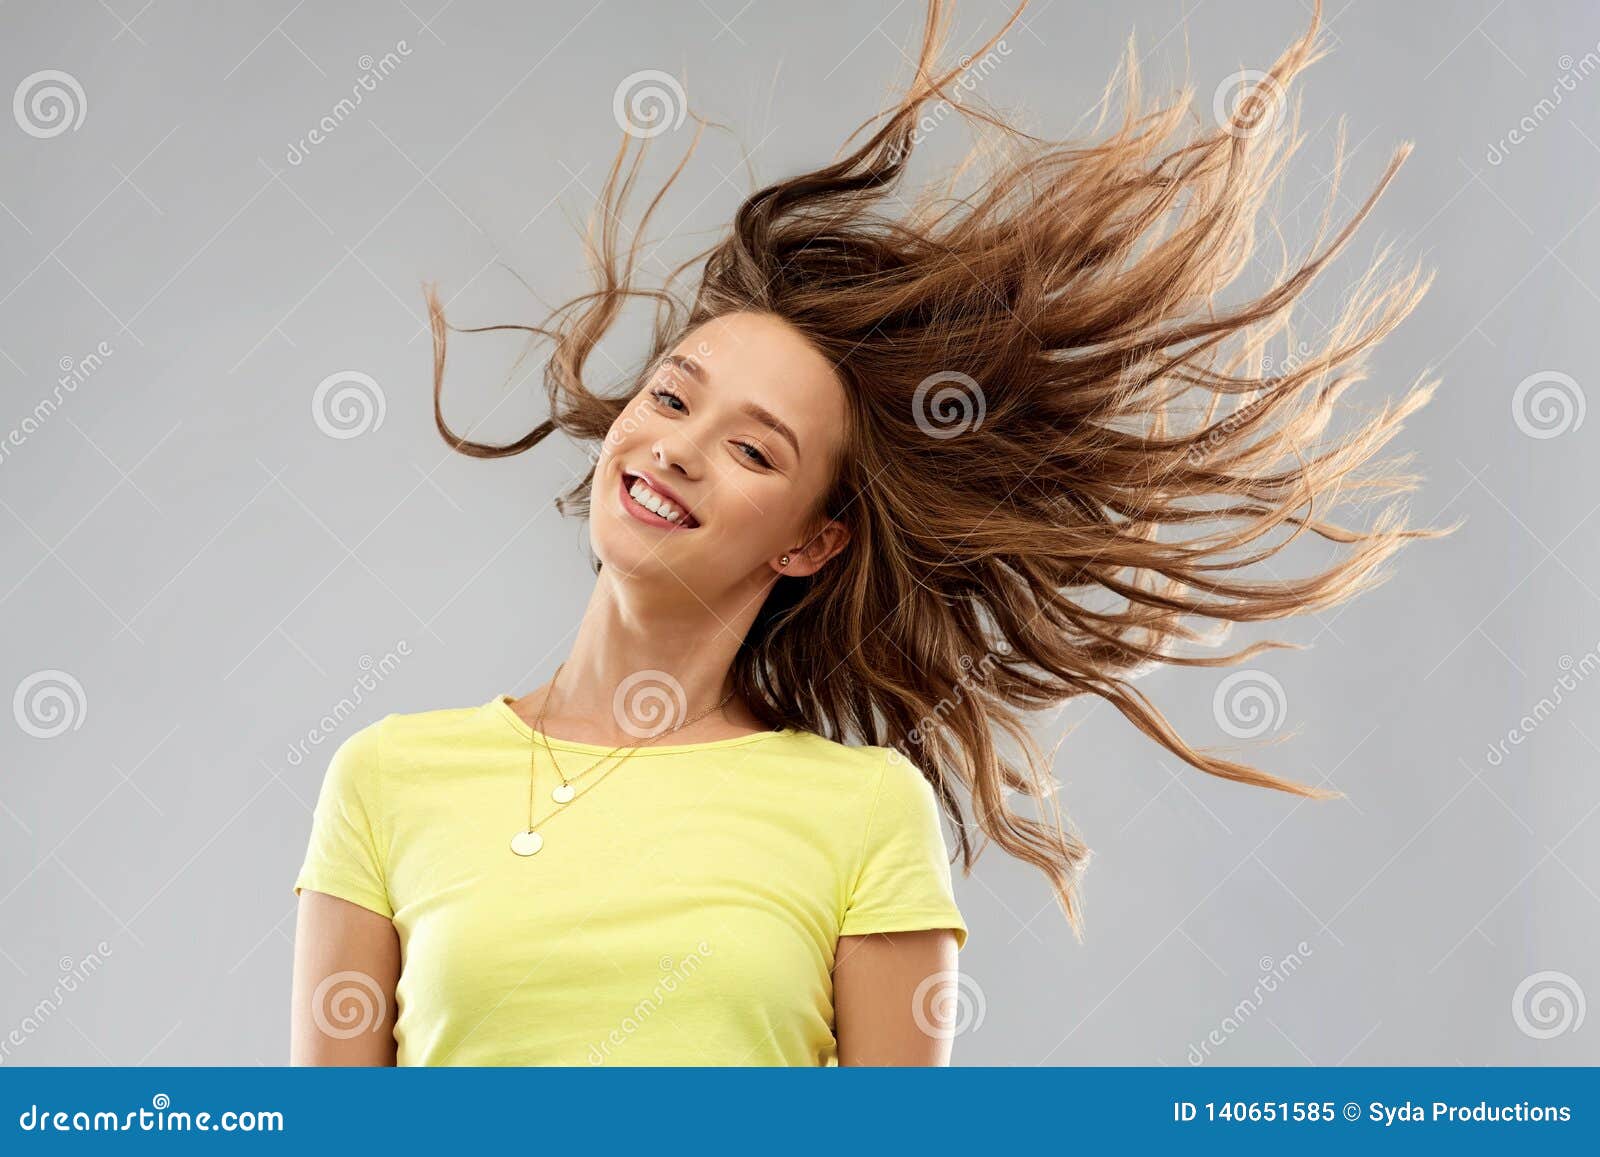 Happy Young Woman With Waving Long Hair Stock Image Image